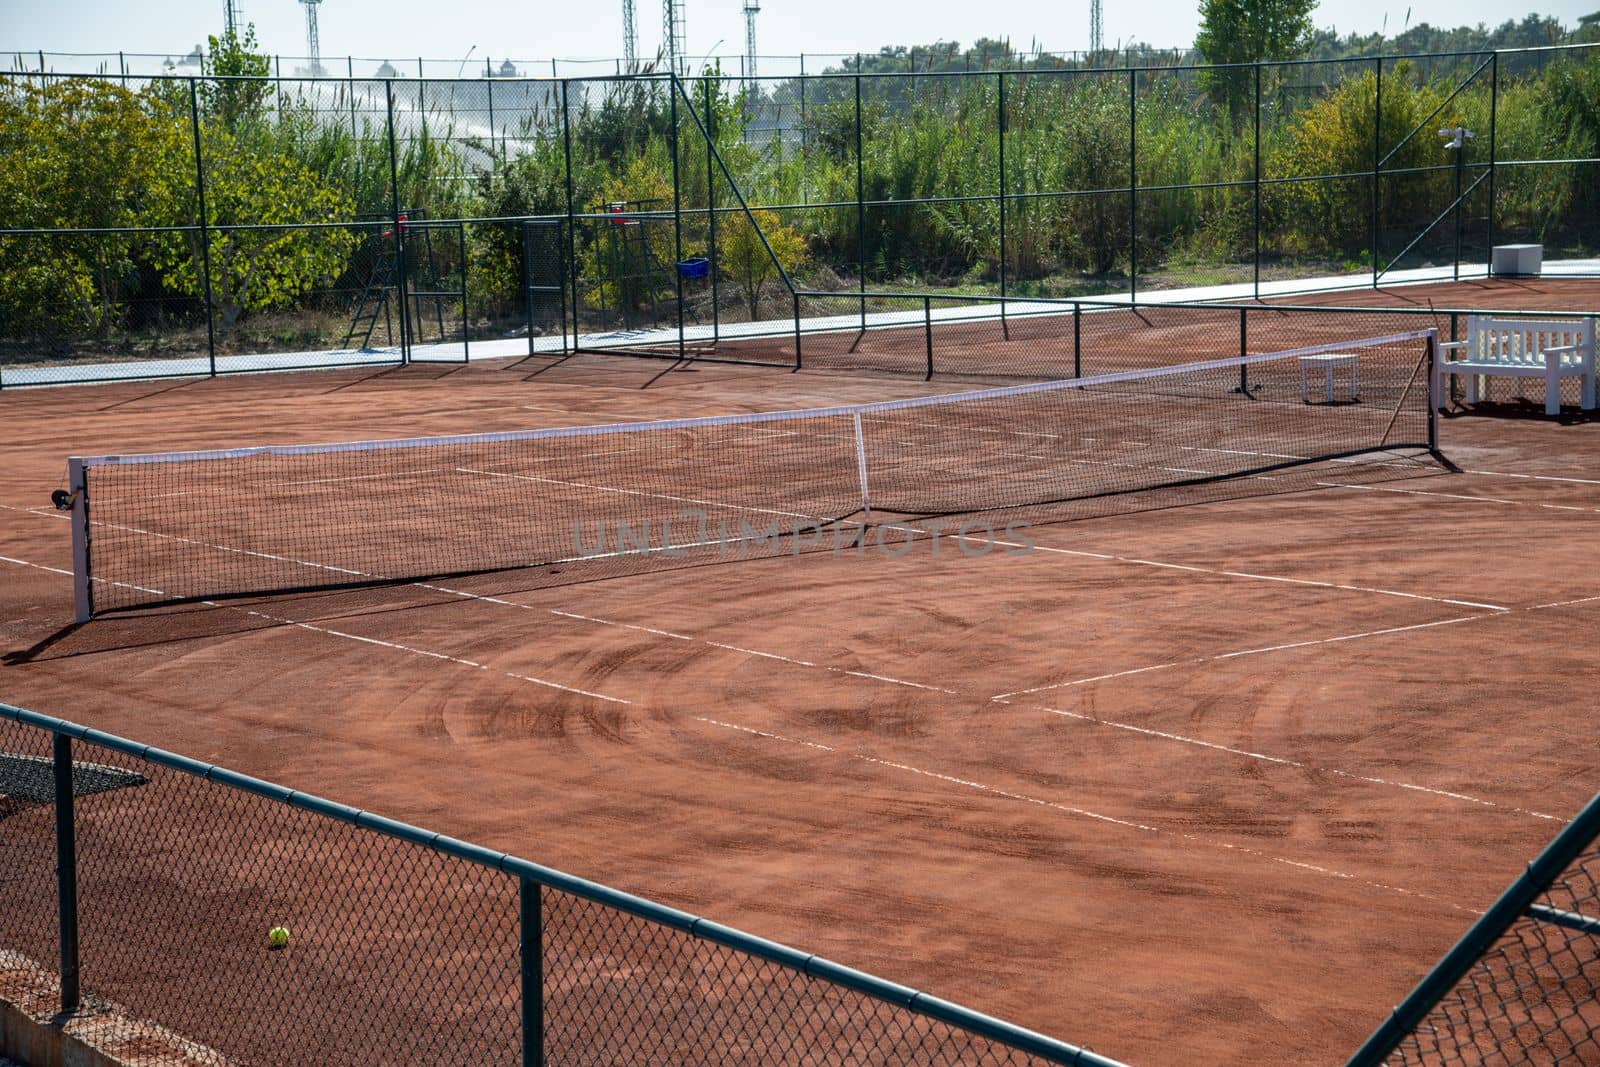 Baseline and net of an empty clay tennis court on a sunny day by Sonat